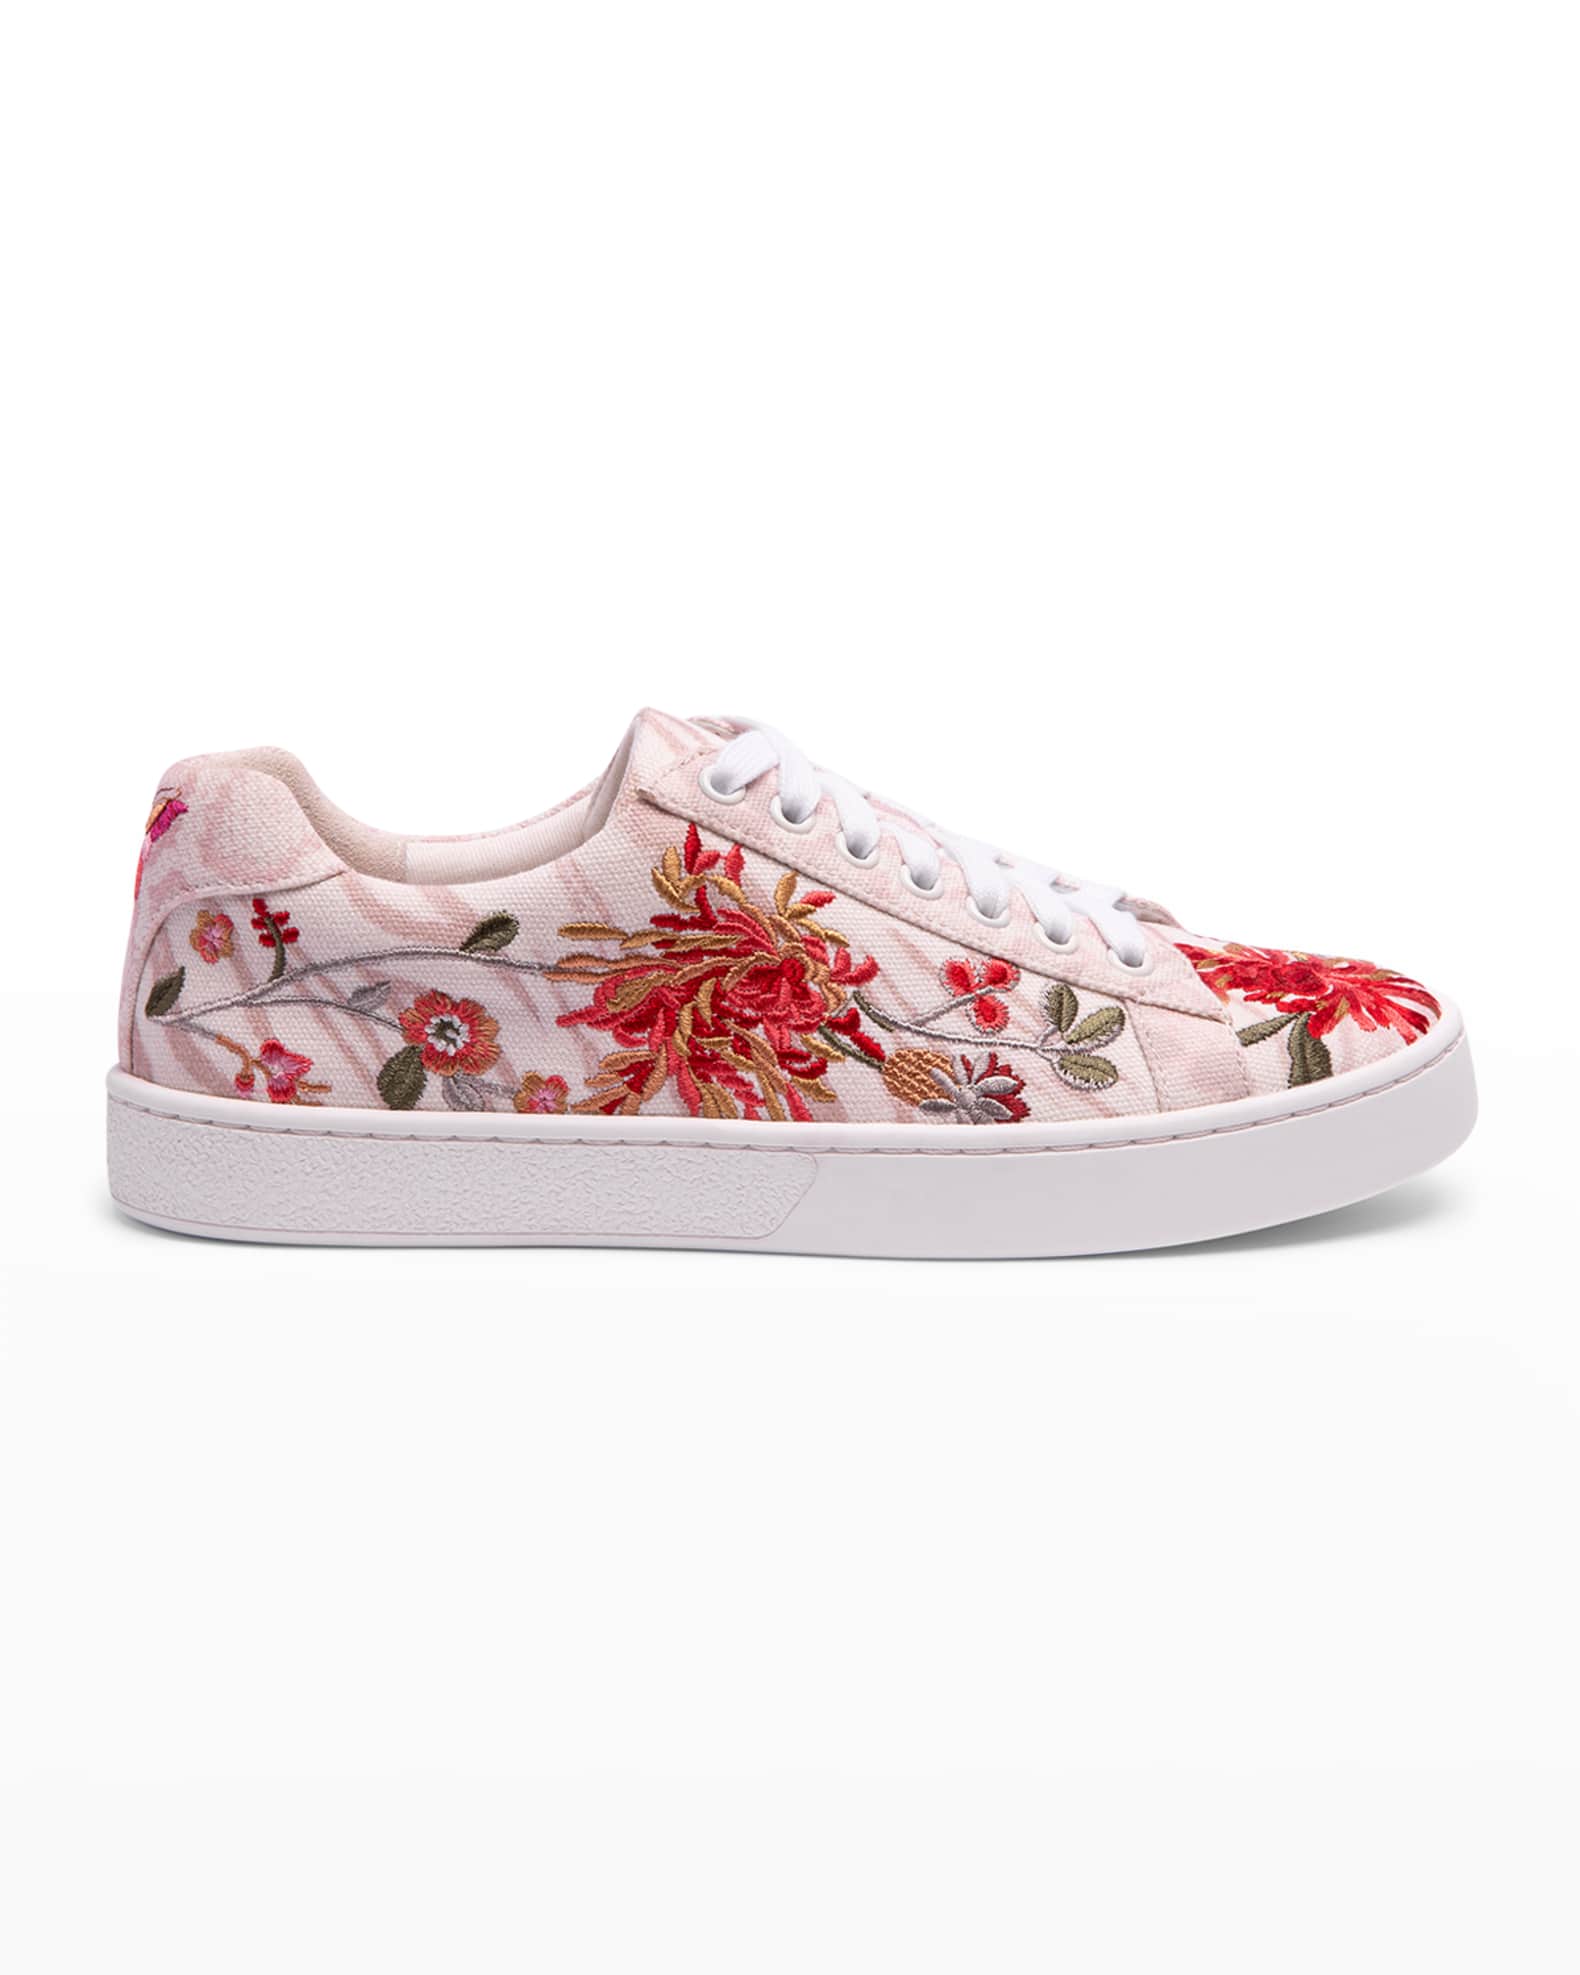 Johnny Was Jayla Floral Embroidered Low-Top Sneakers | Neiman Marcus